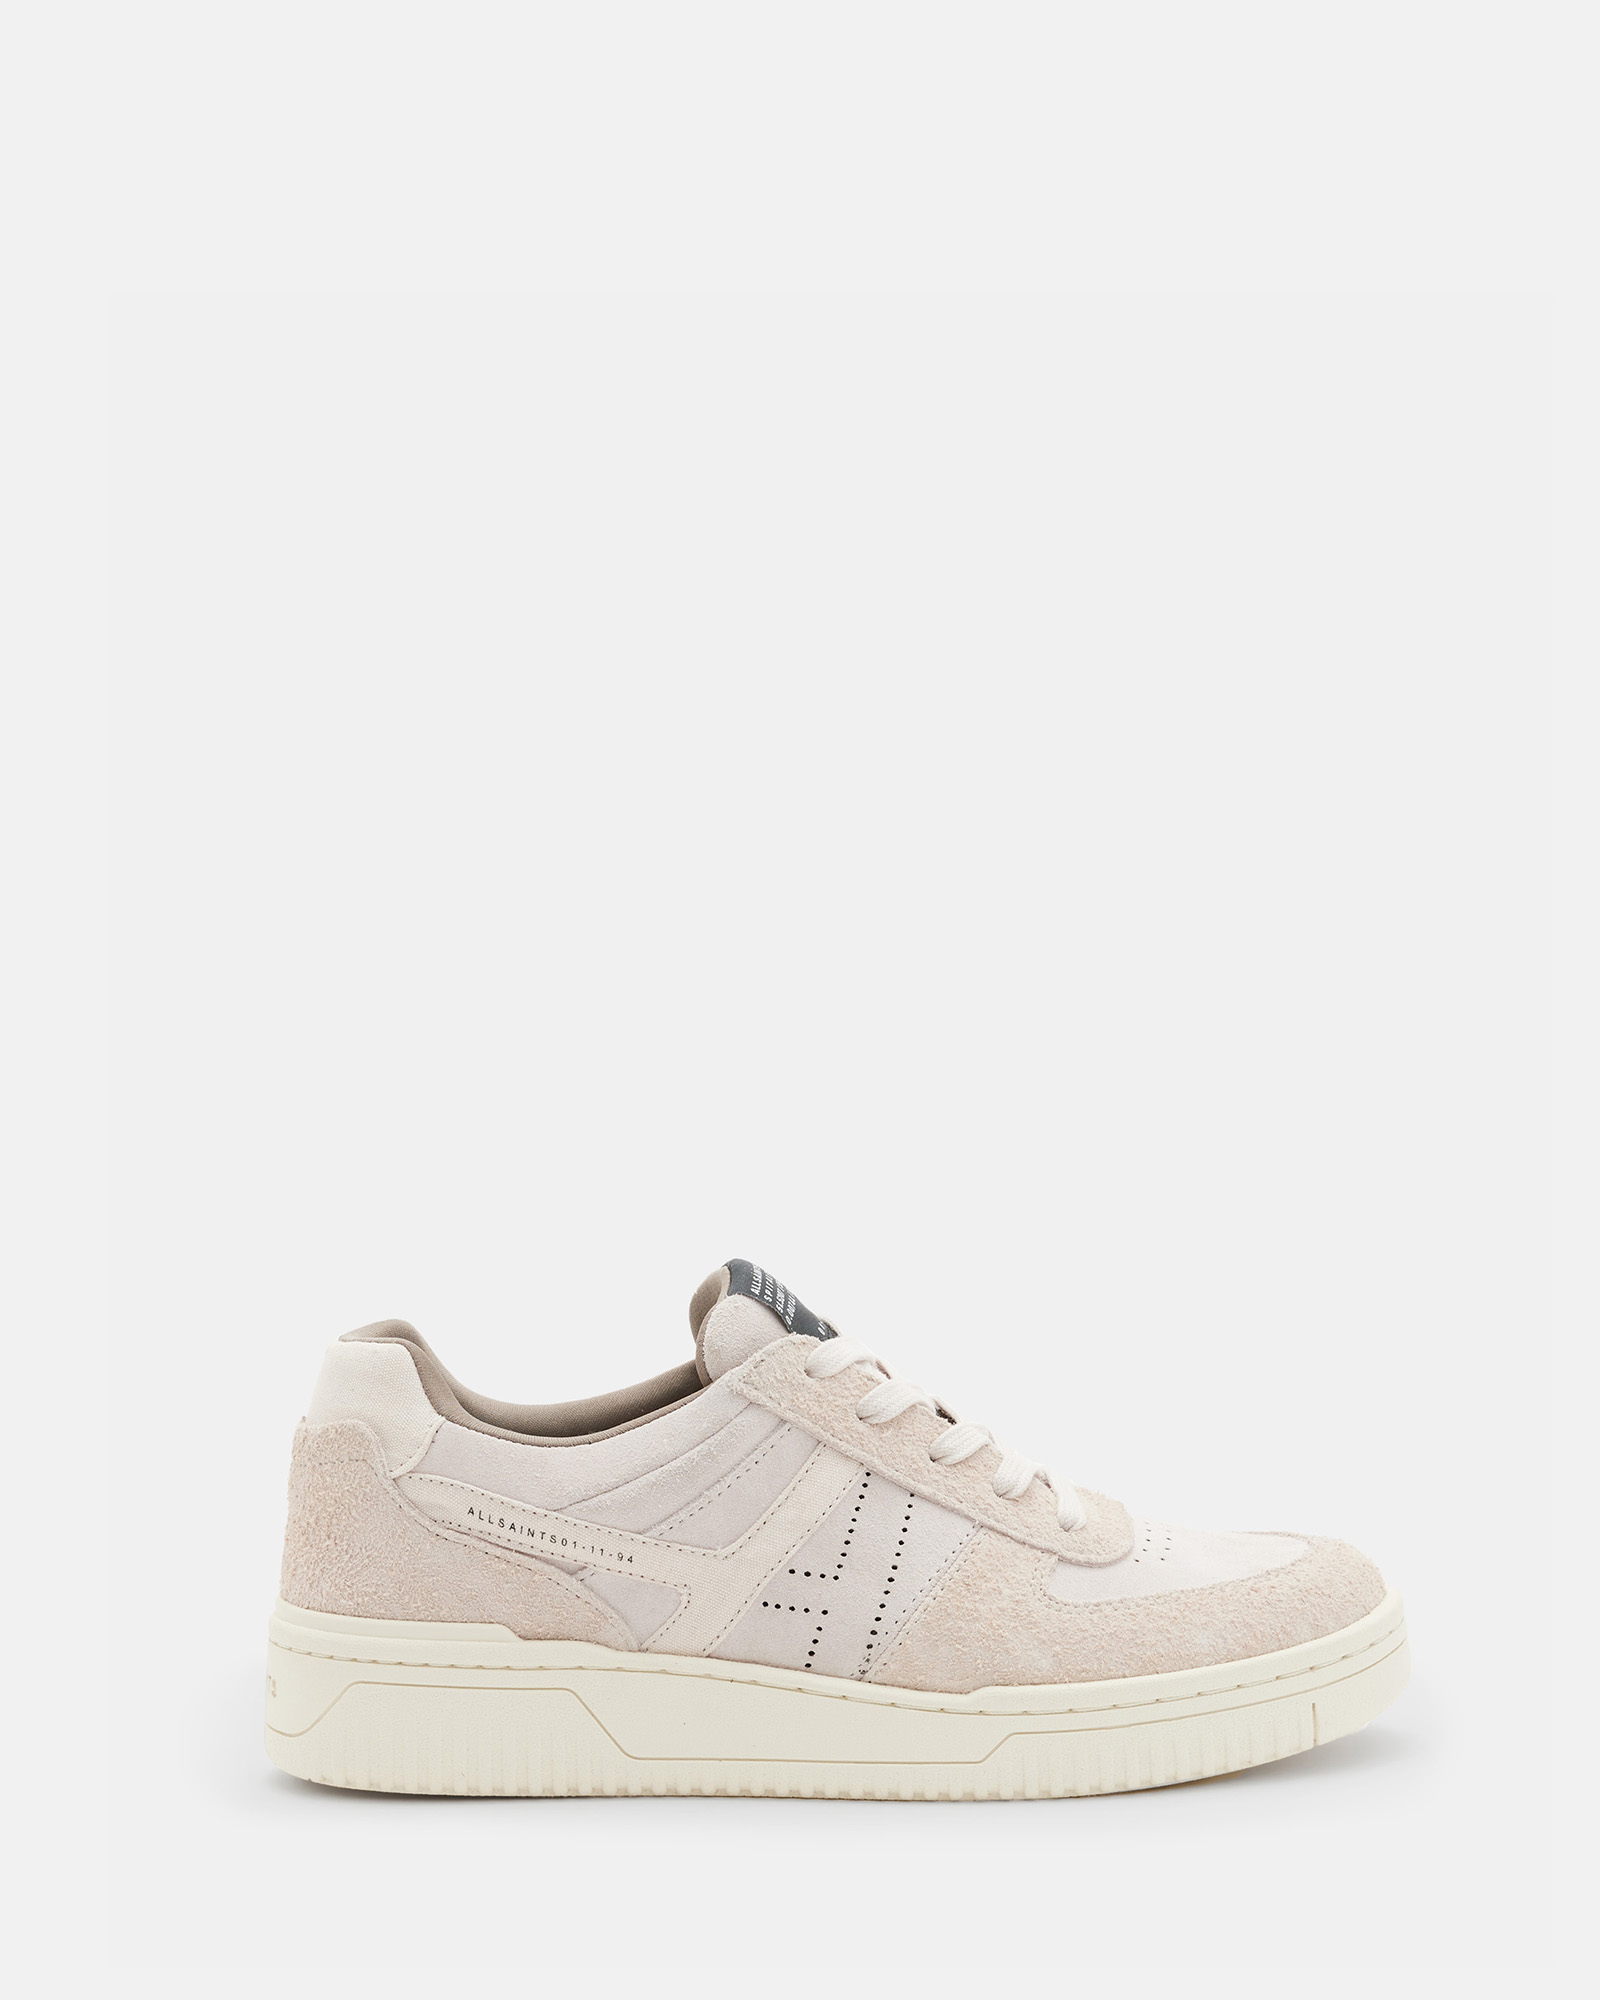 AllSaints Vix Low Top Round Toe Suede Trainers,, PALE ROSE PINK